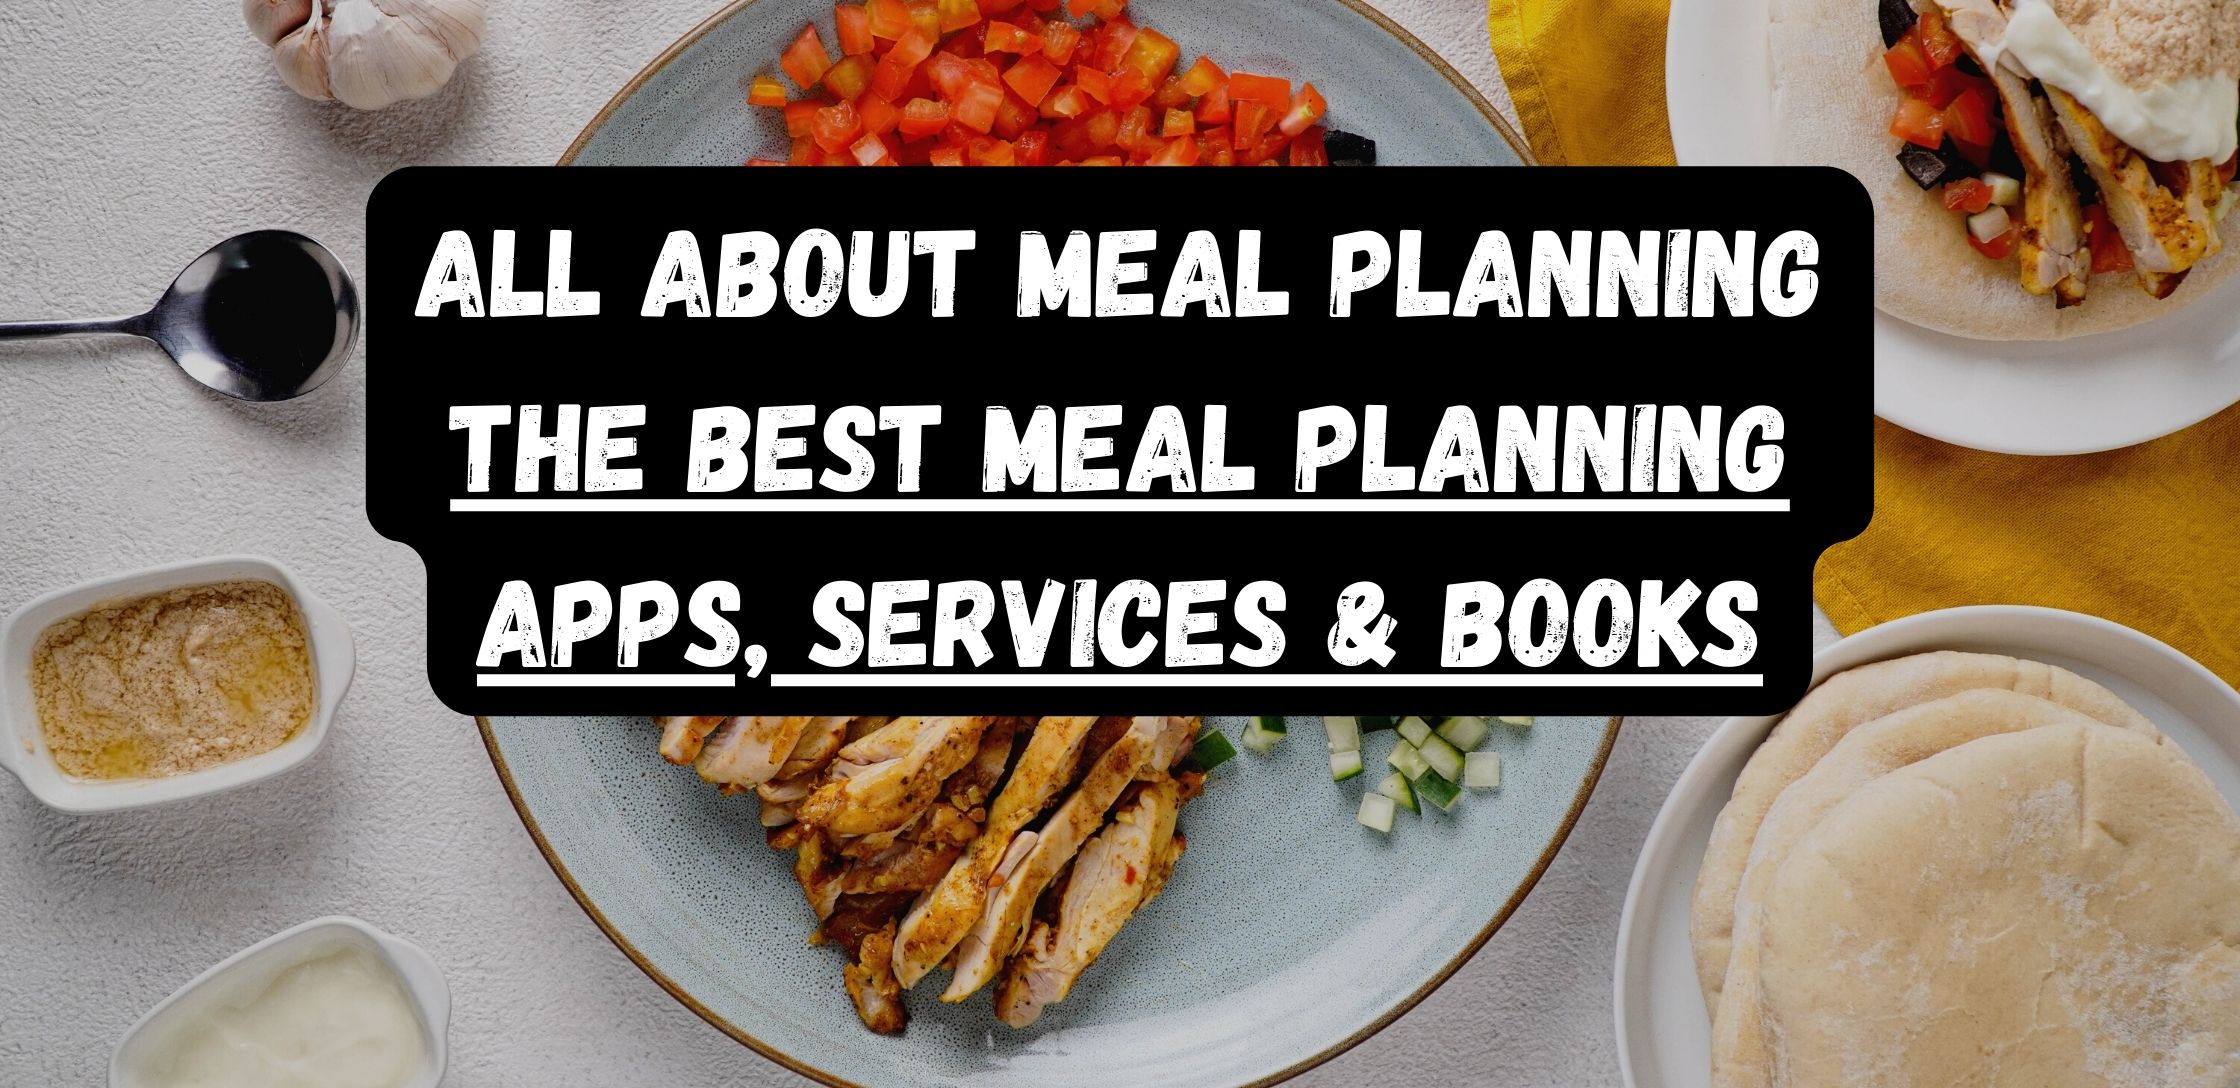 All About Meal Planning – The Best Meal Planning Apps, Services & Books